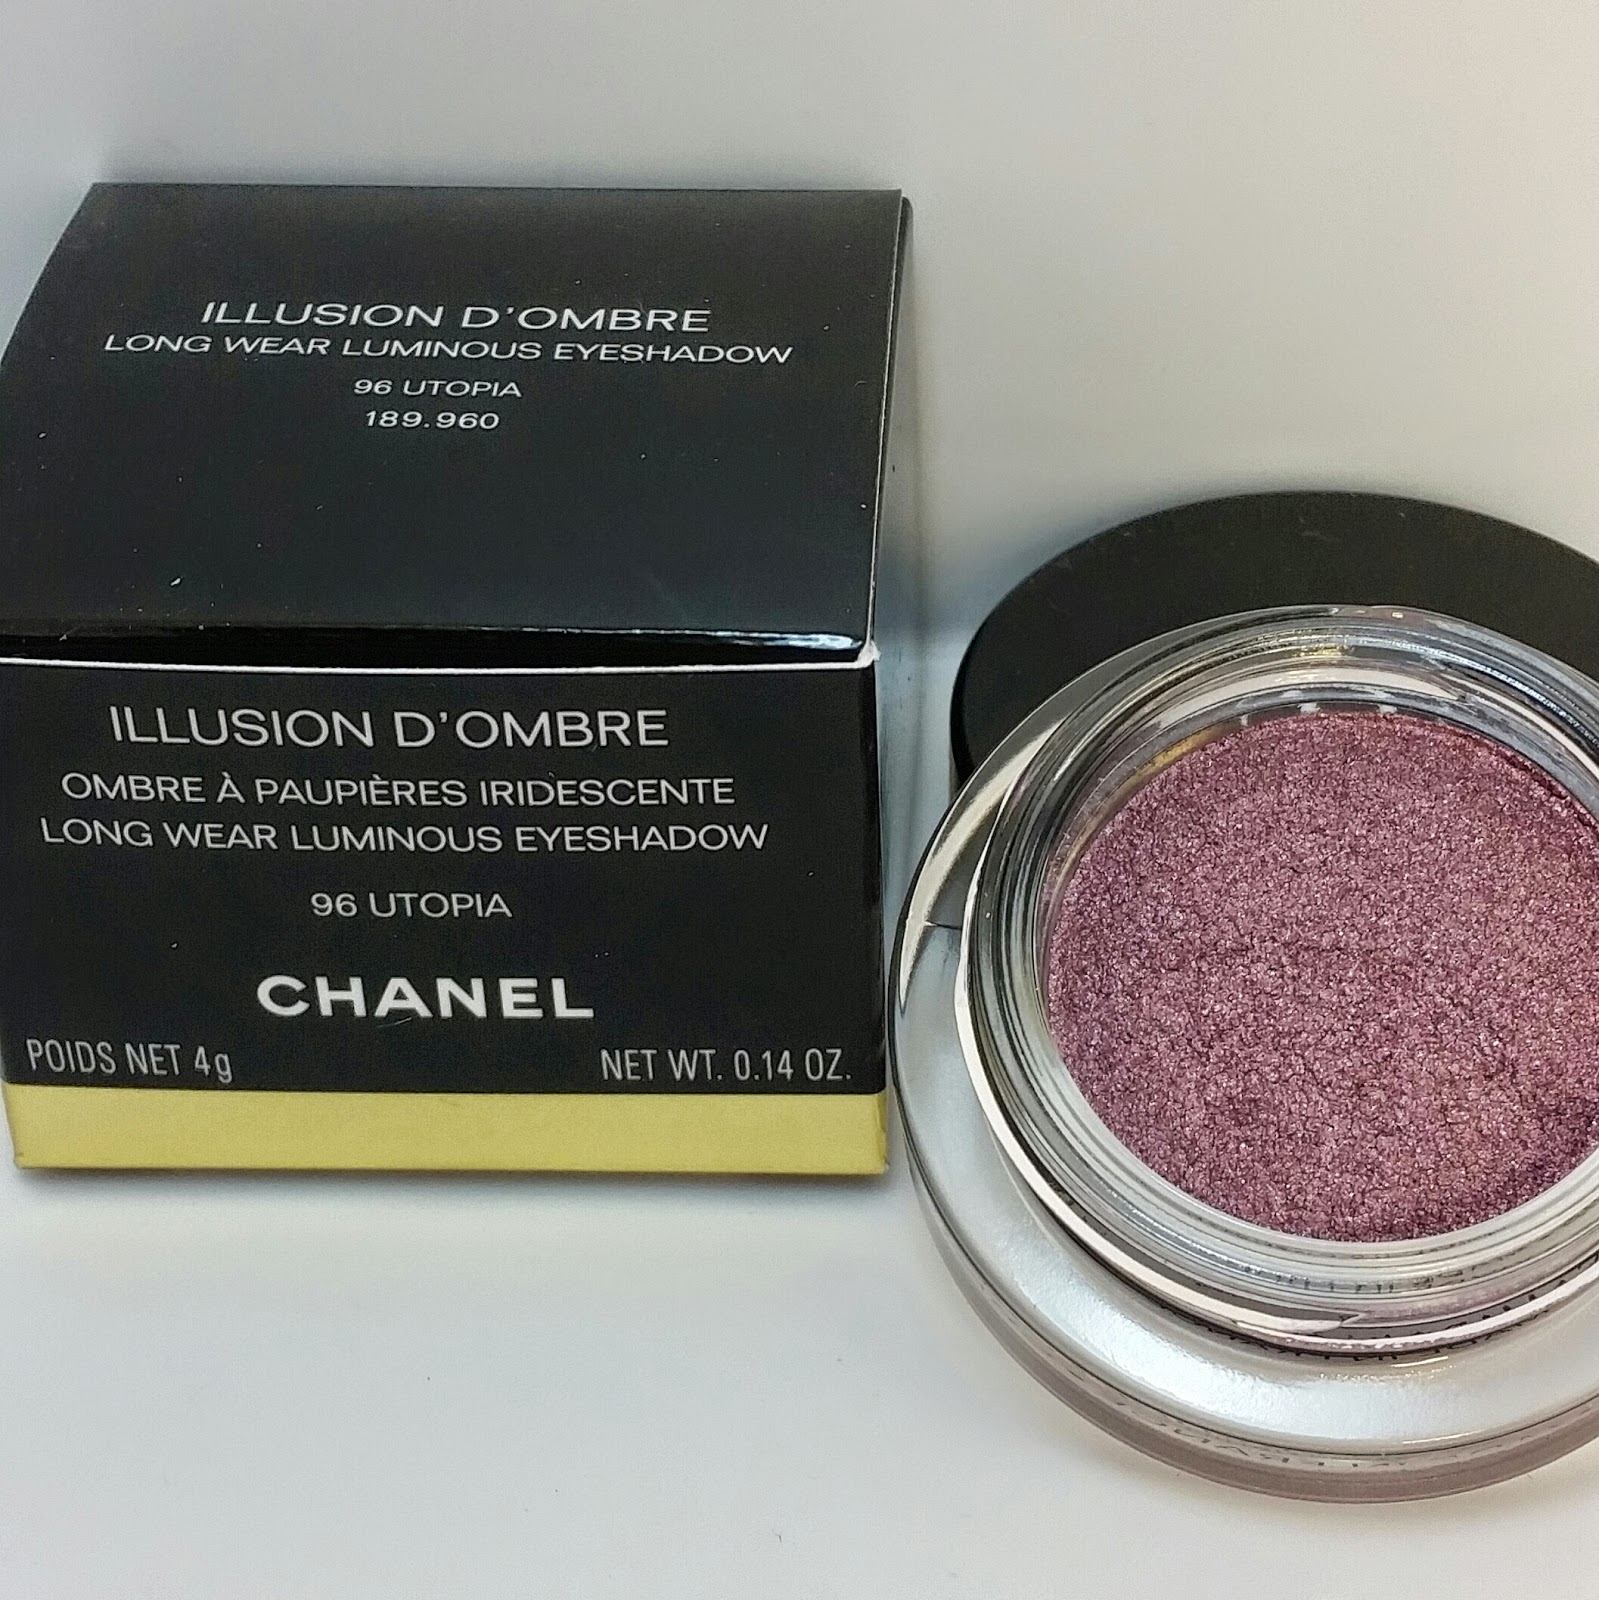 Chanel Illusion D'Ombre Eyeshadow Review, Pix & Swatches